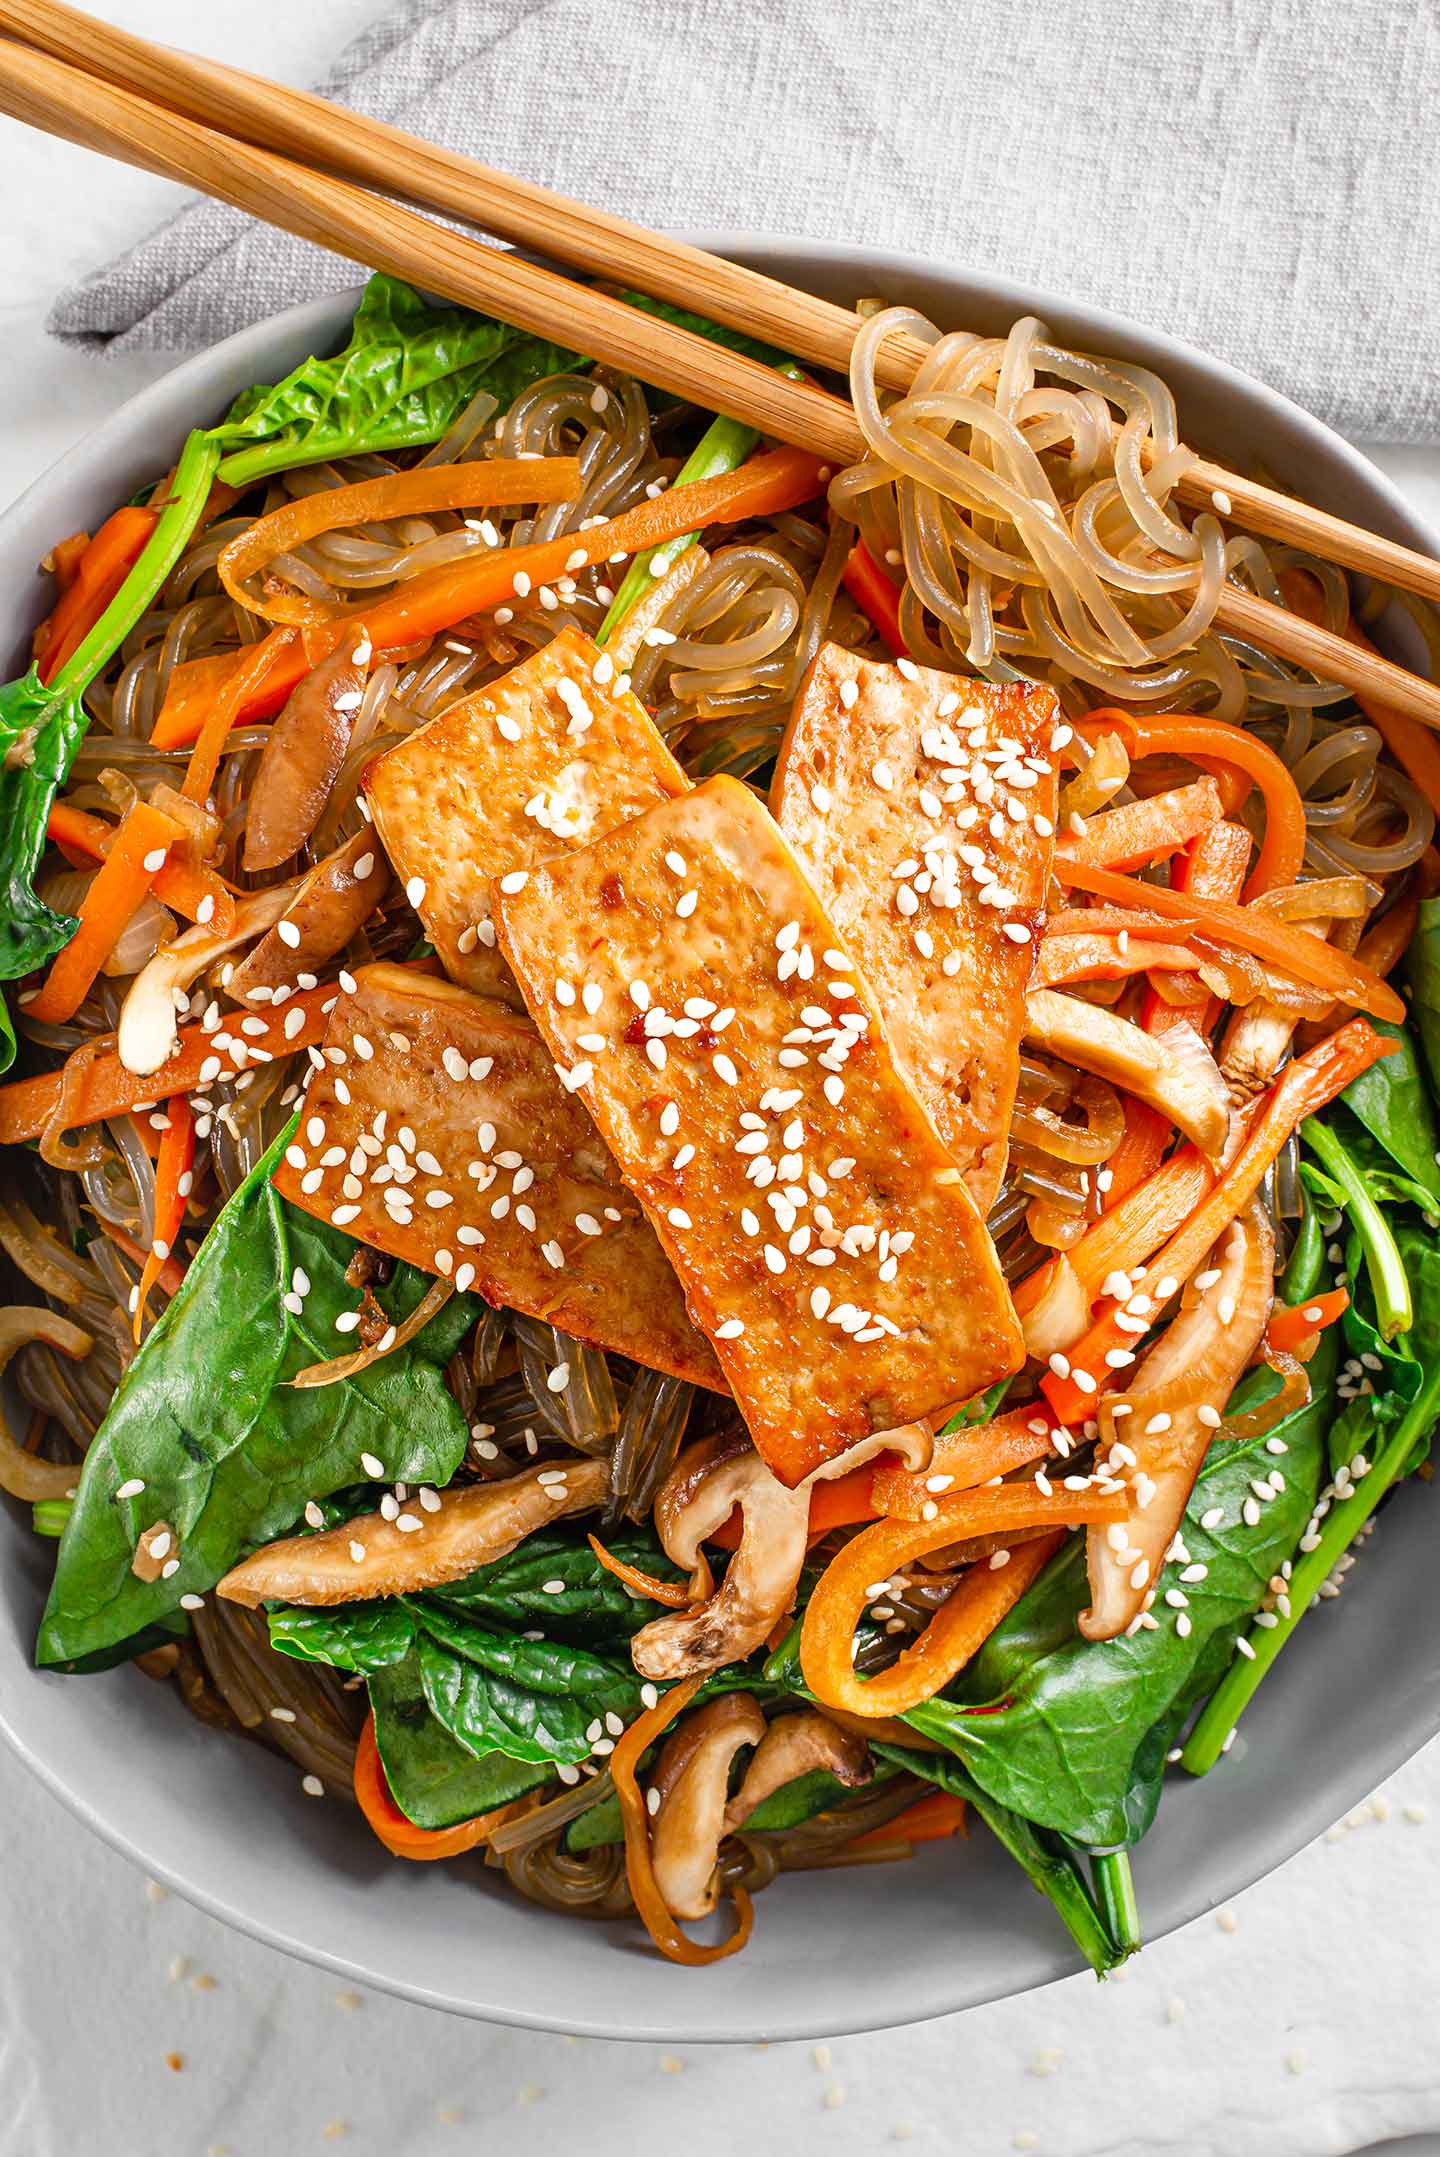 Top down view of simple vegan japchae in a bowl. Glass noodles are wrapped around chopsticks, carrots, onion, mushroom, and spinach mix with the noodles. Tofu and toasted sesame seeds top it off.